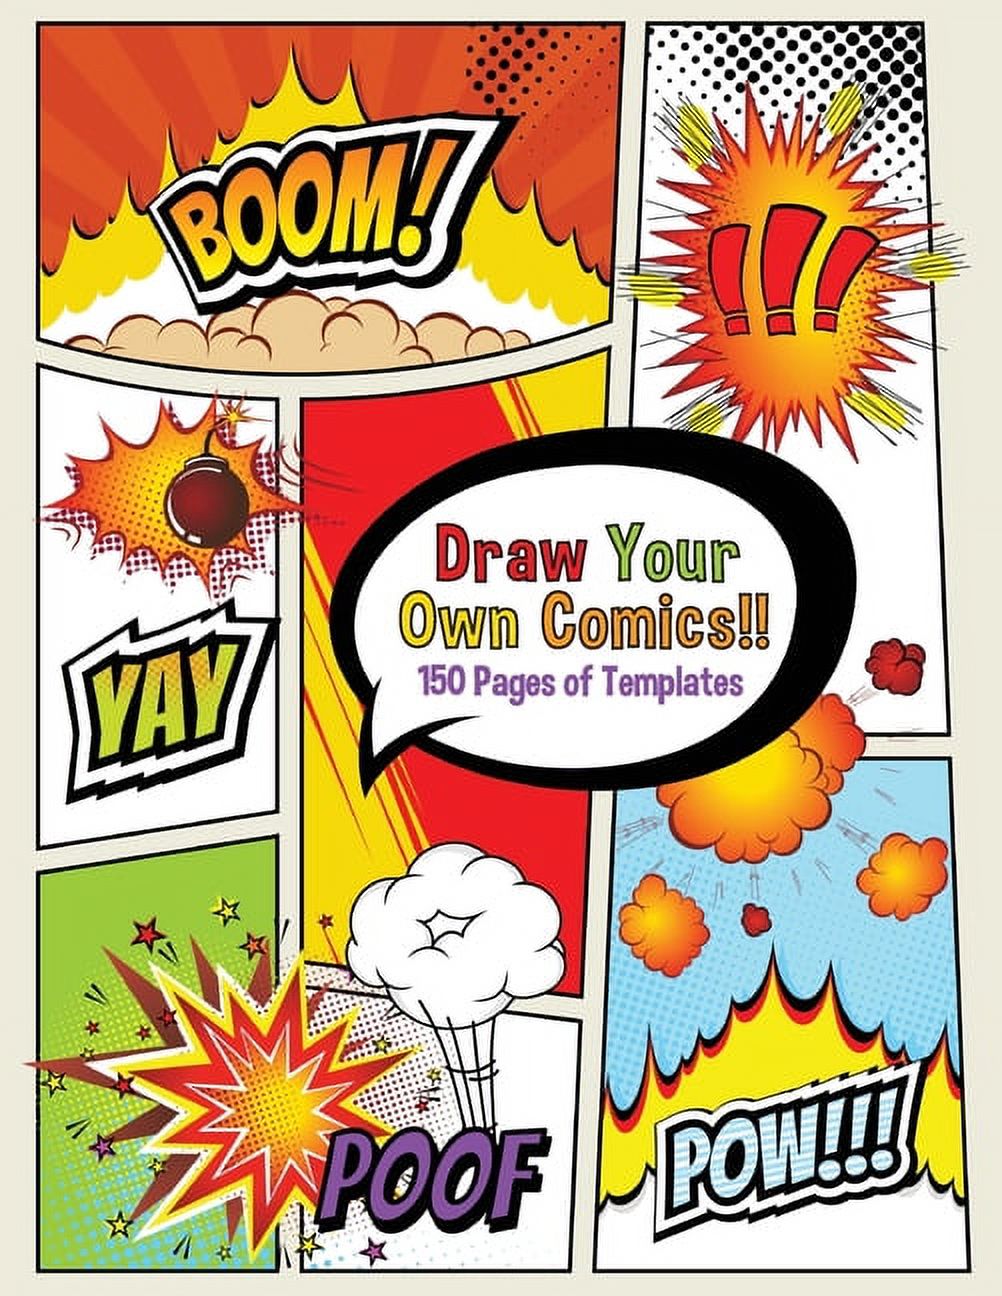 Draw Your Own Comics! 150 pages of blank templates for kids and adults (Paperback) - image 1 of 1